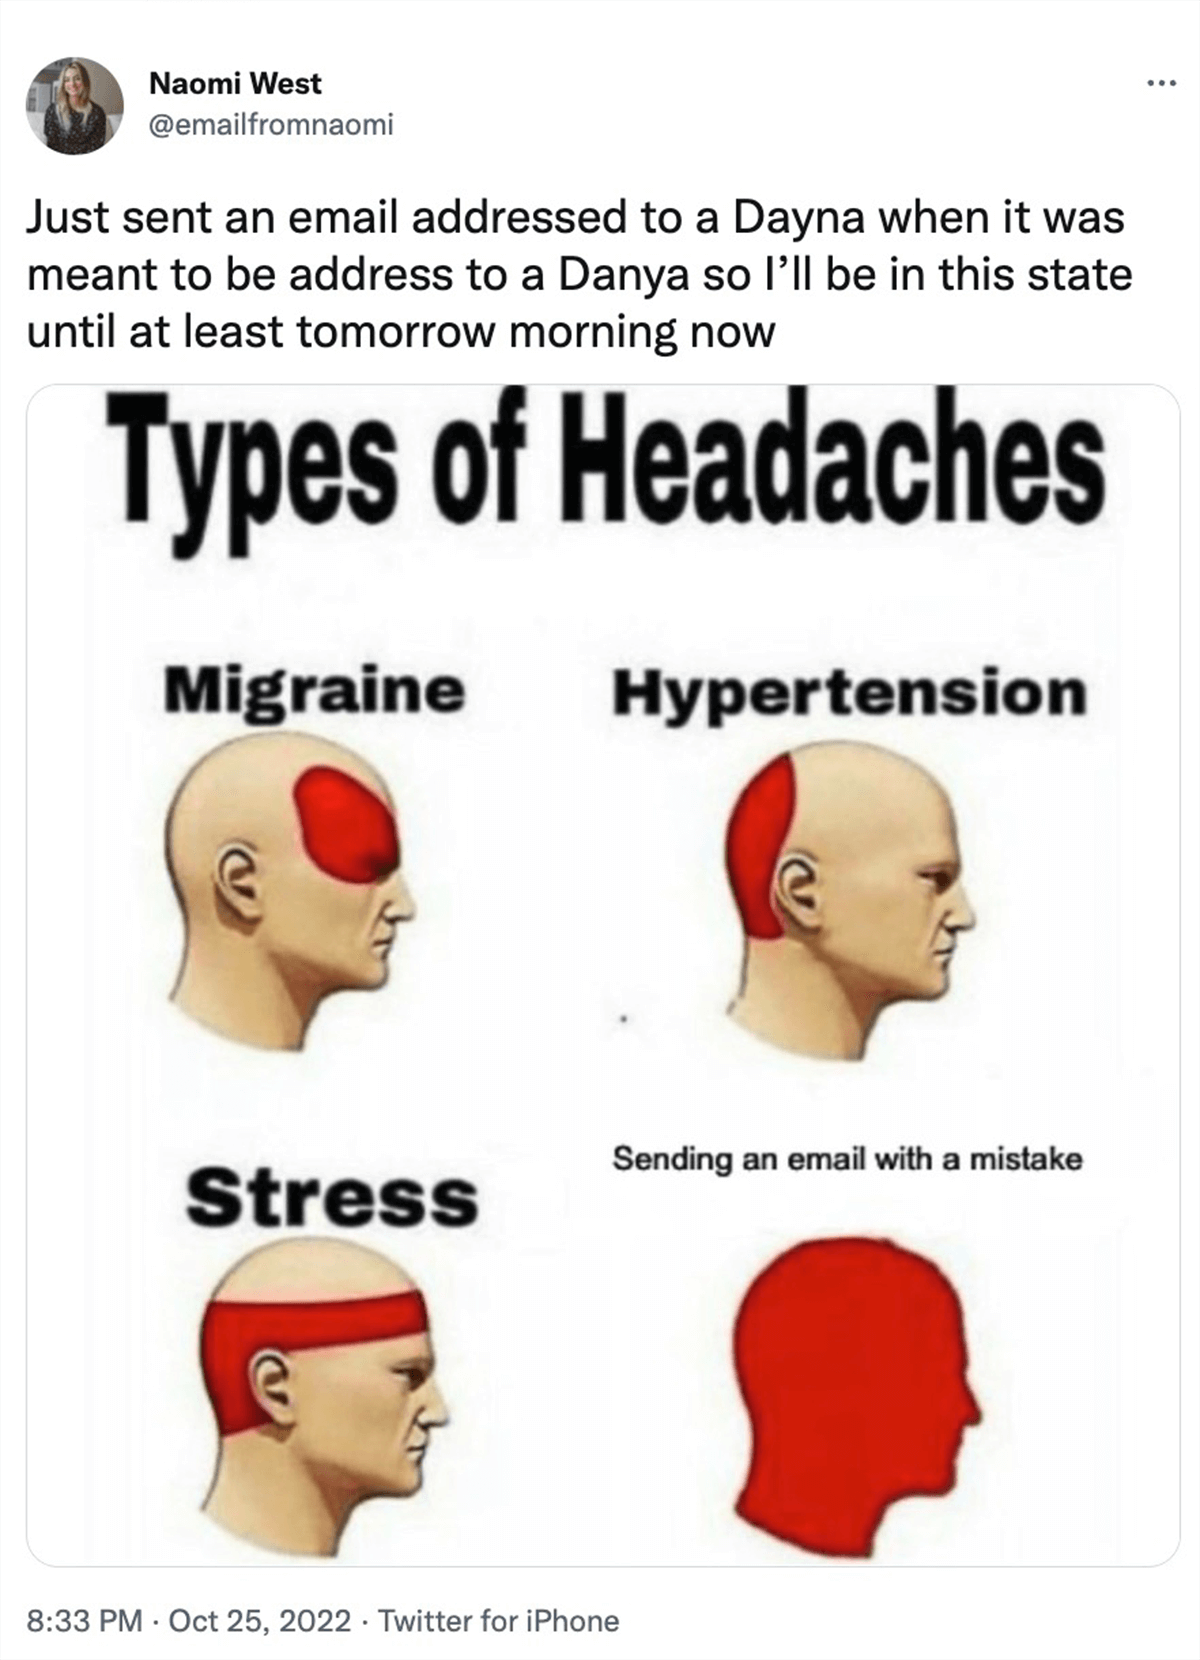 @emailfromnaomi on Twitter: Just sent an email addressed to a Dayna when it was mean to be addressed to a Danya so I'll be in this state until at least tomorrow morning now. Image of four types of headaches.